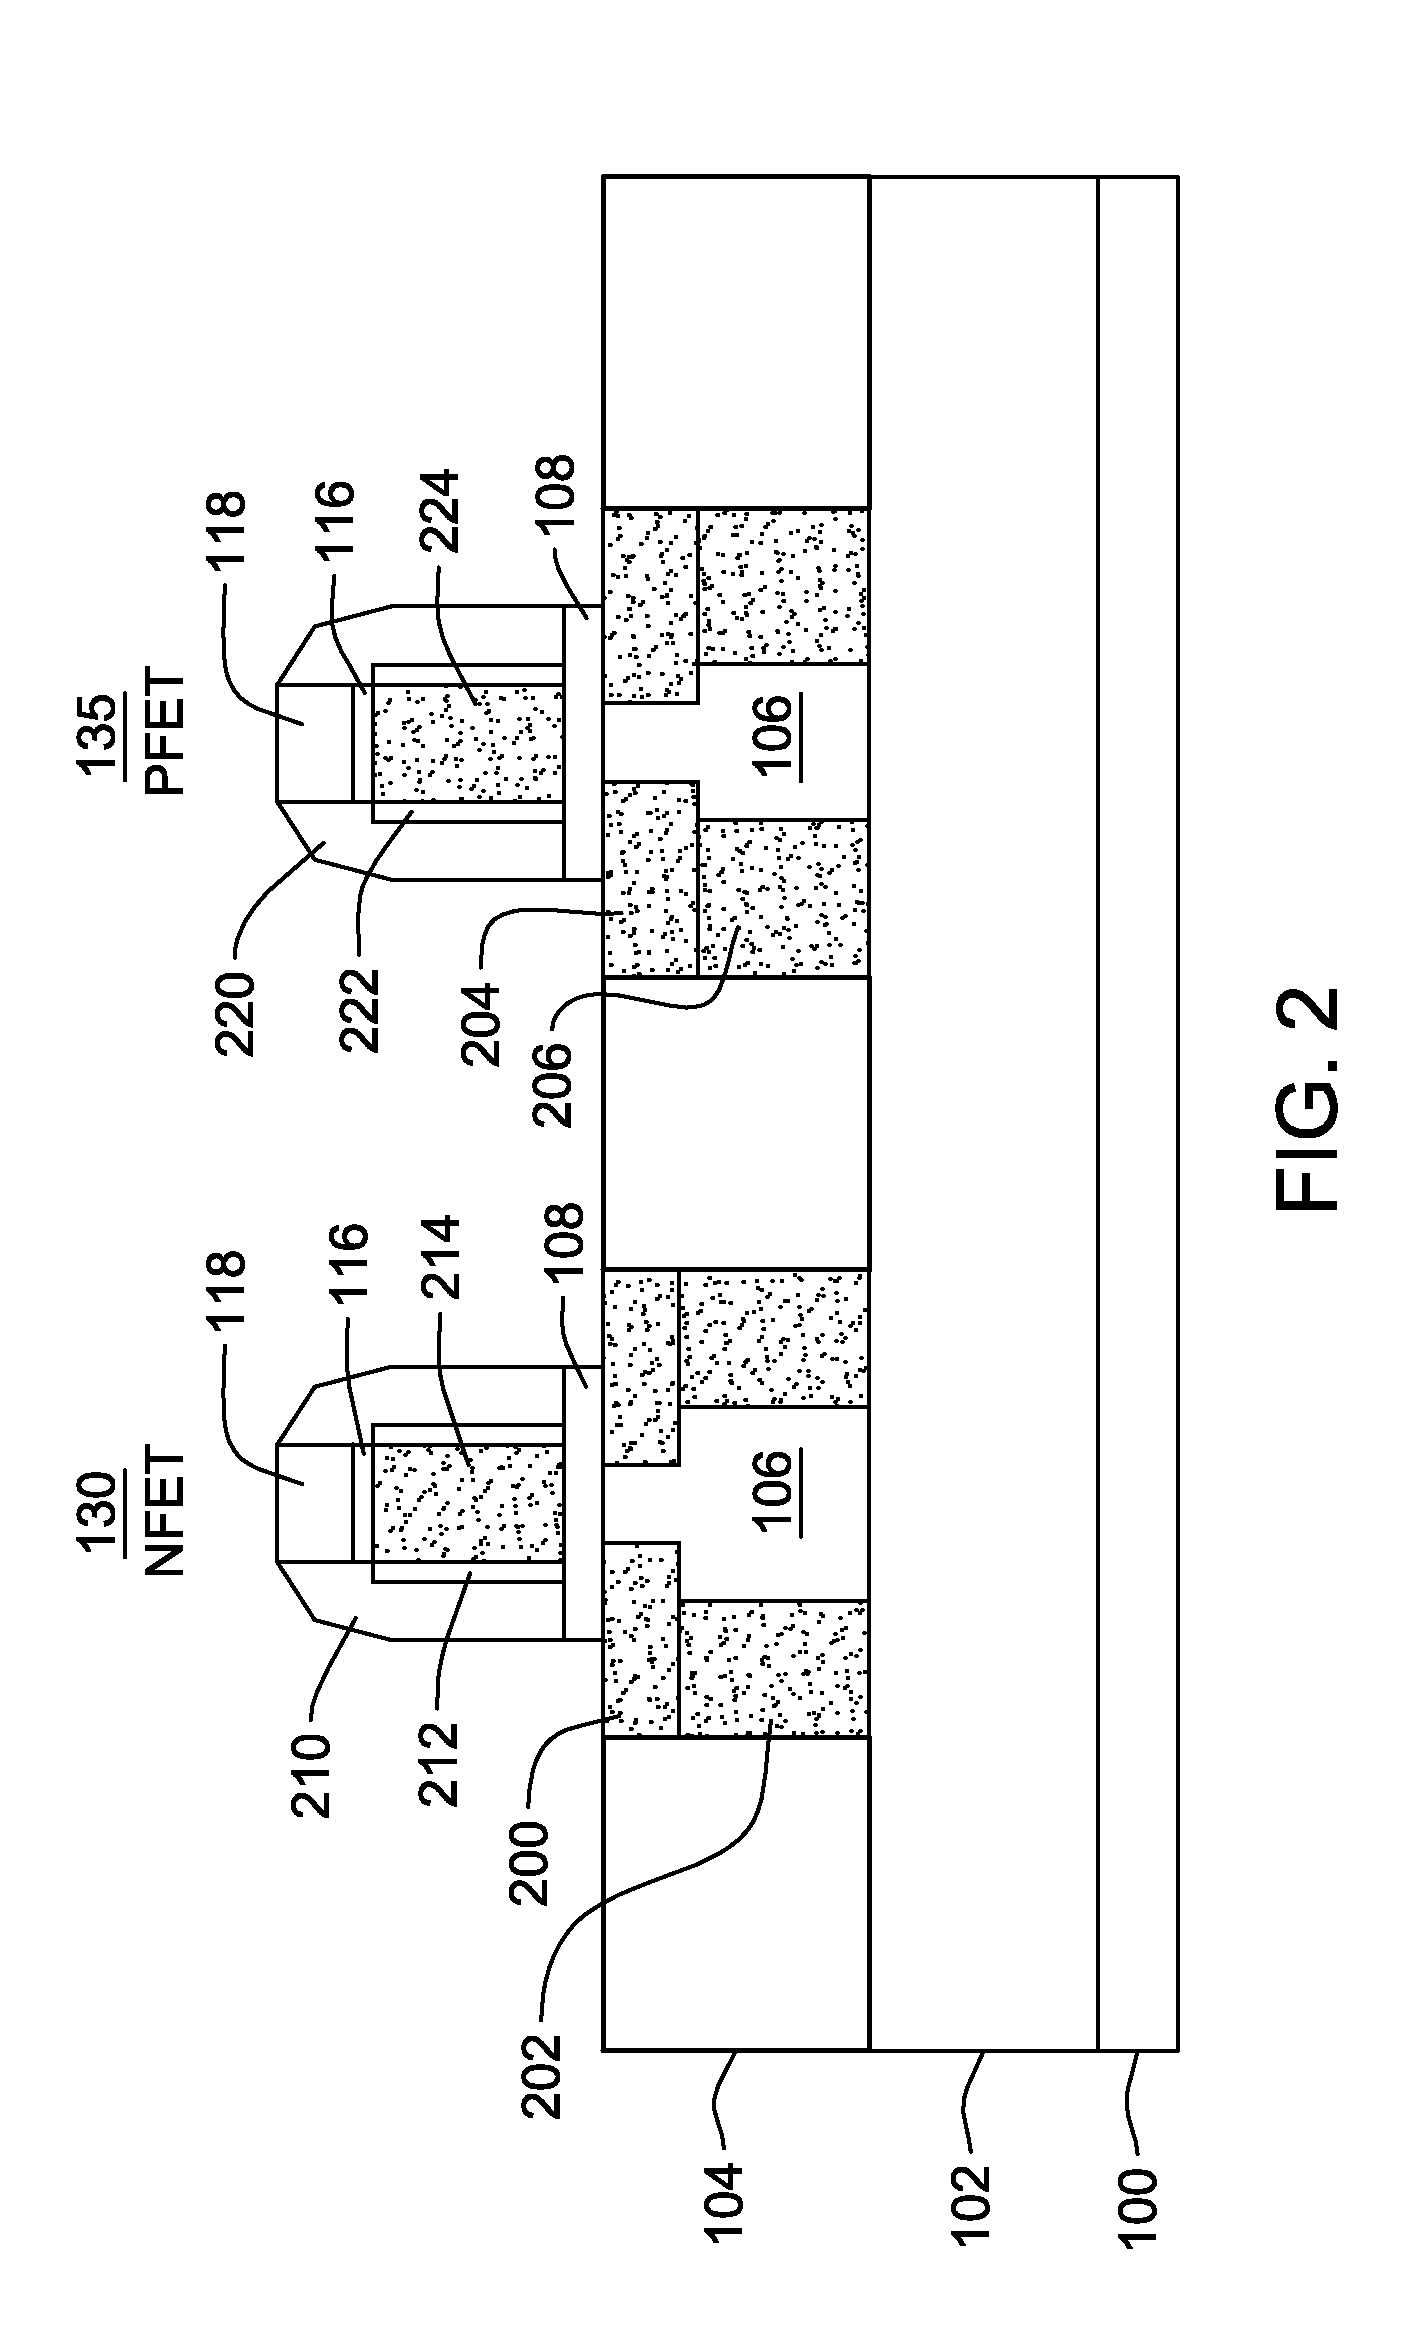 In situ doped embedded sige extension and source/drain for enhanced PFET performance